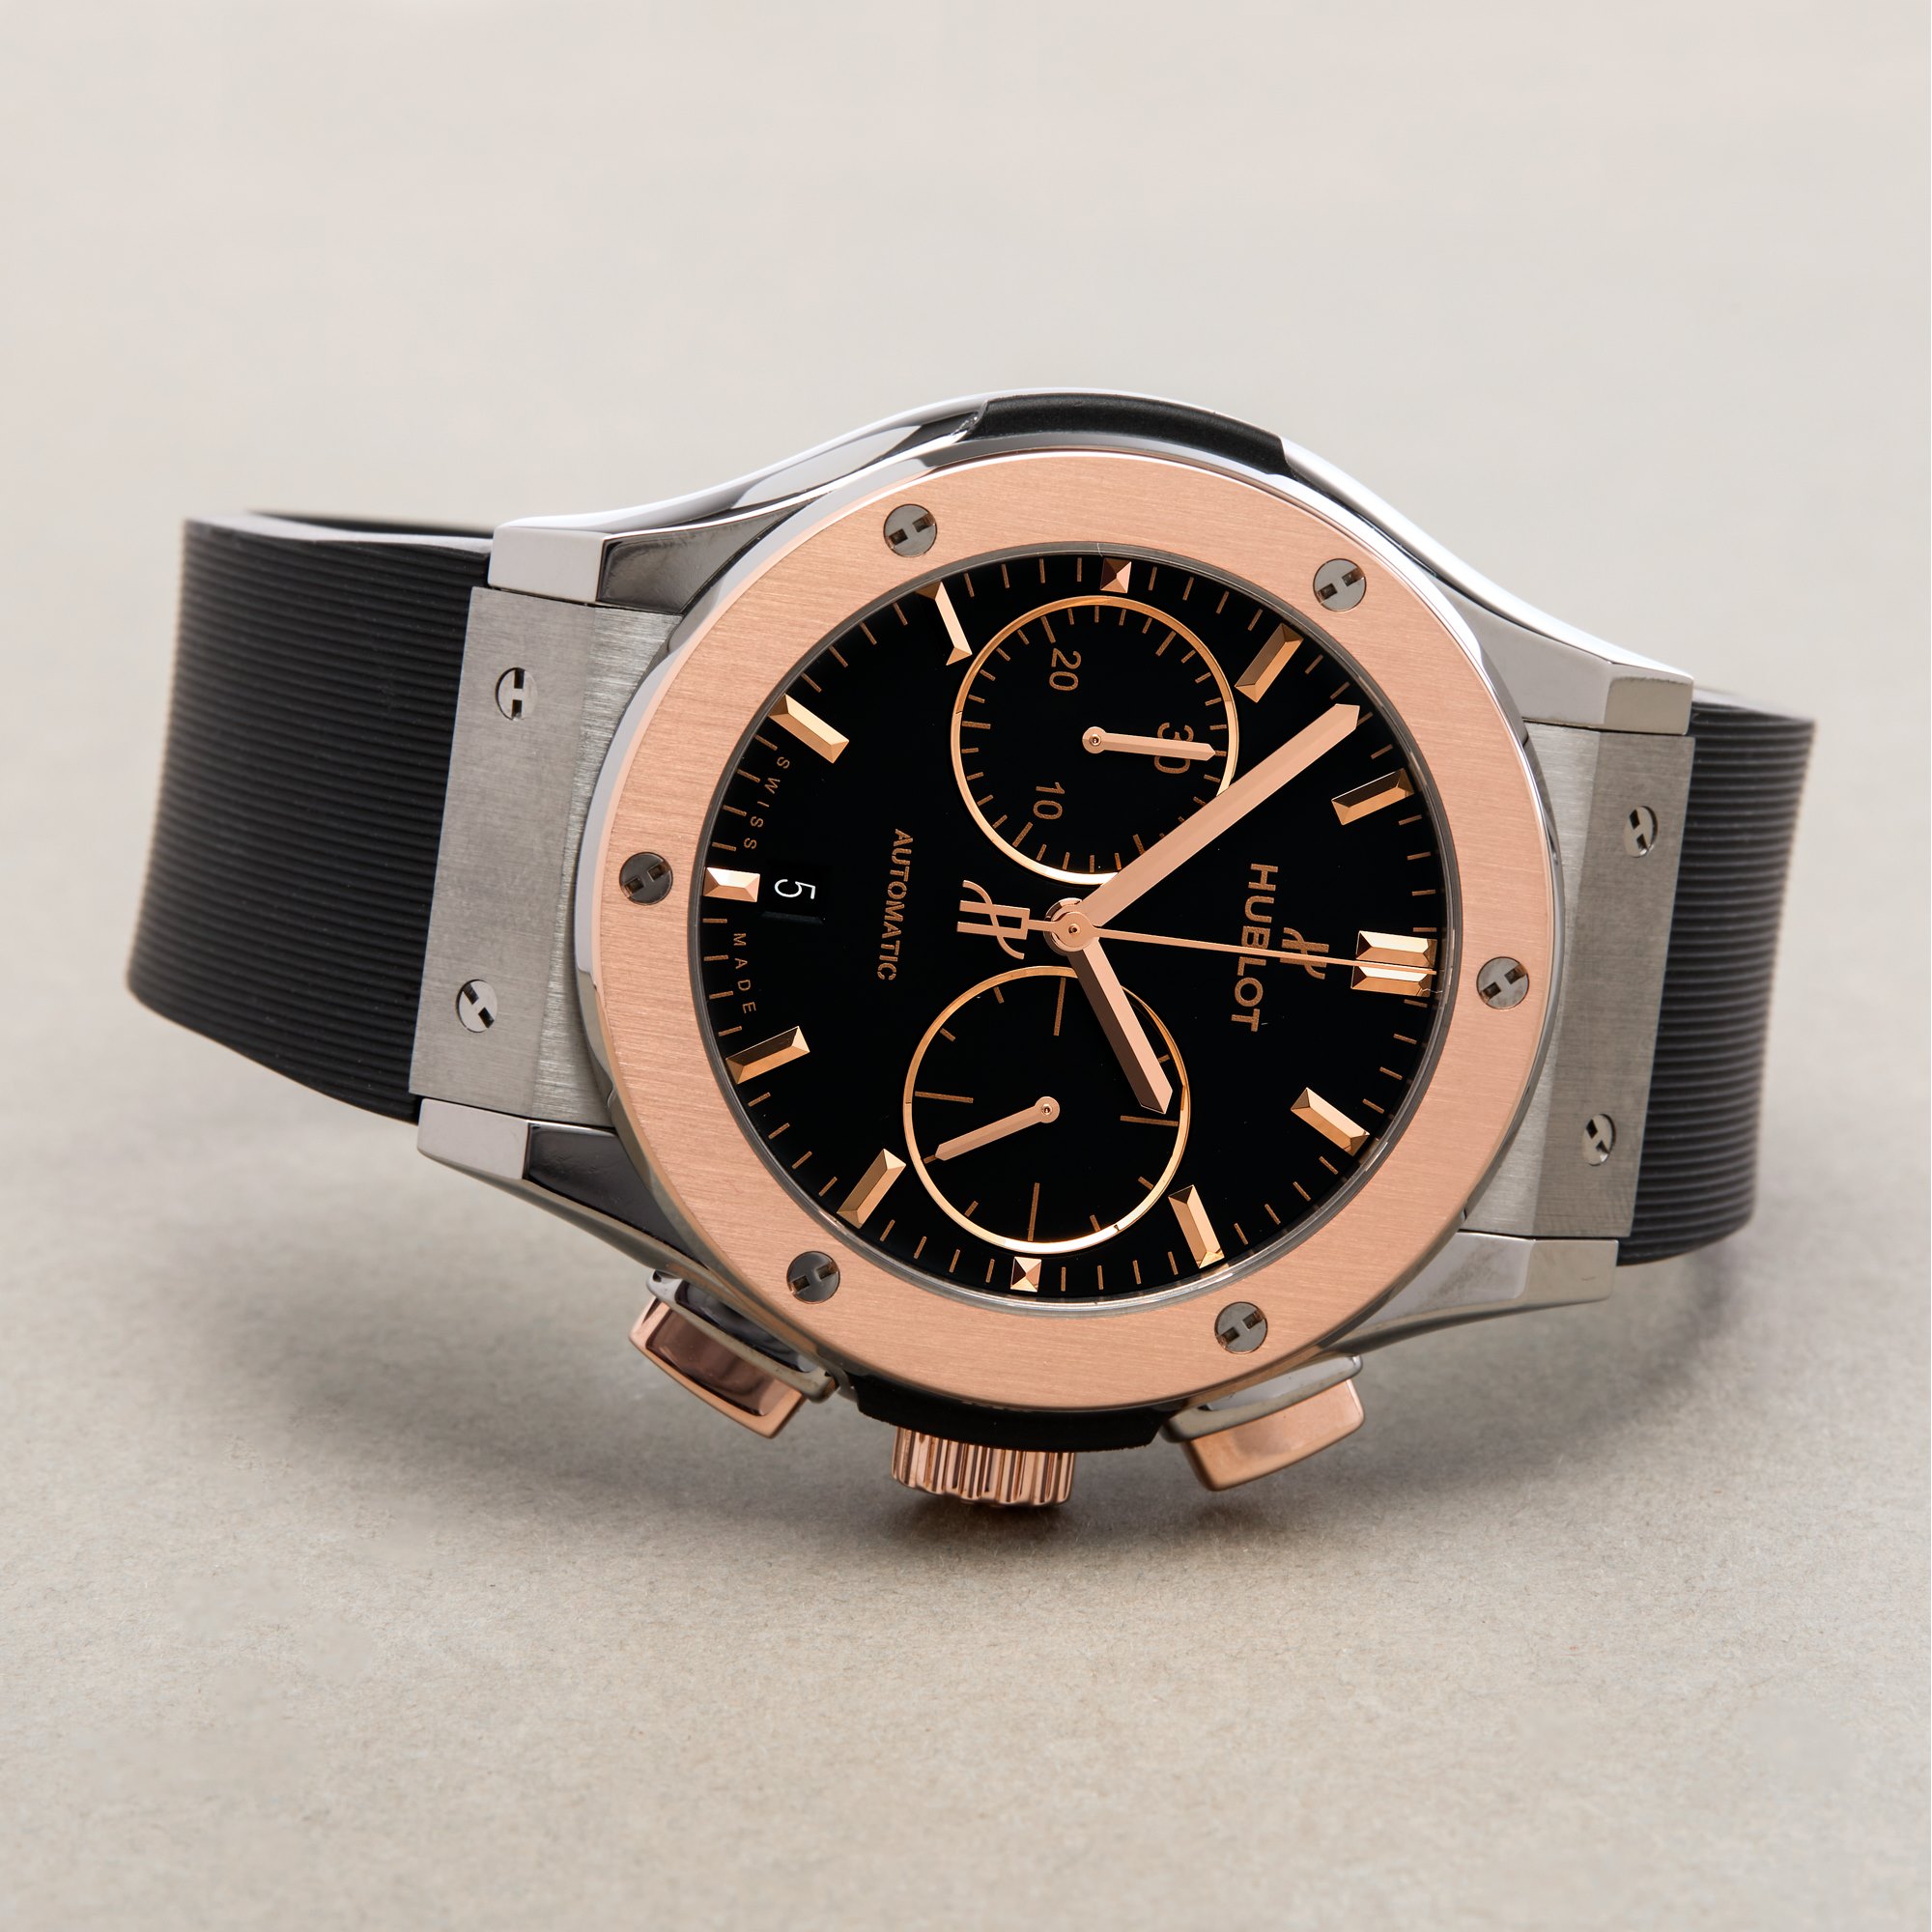 Hublot Classic Fusion 18K Rose Gold & Stainless Steel 521.NO.1181.RX